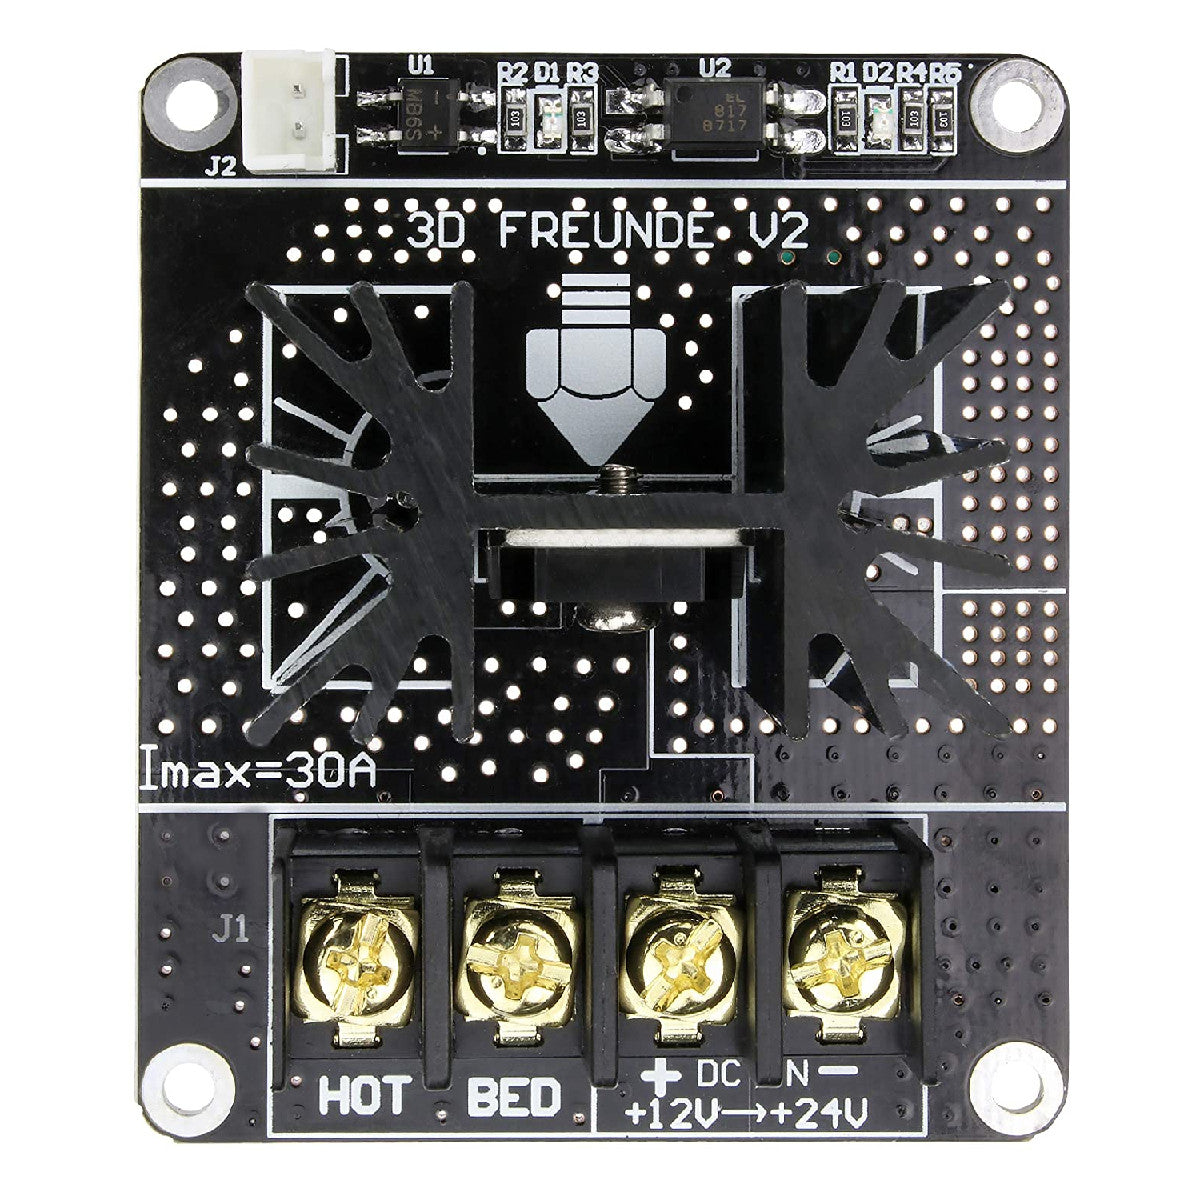 3D FREUNDE Upgraded MOSFET V2 to Relieve the Mainboard, Safe Operation of Heatbed or Hotend